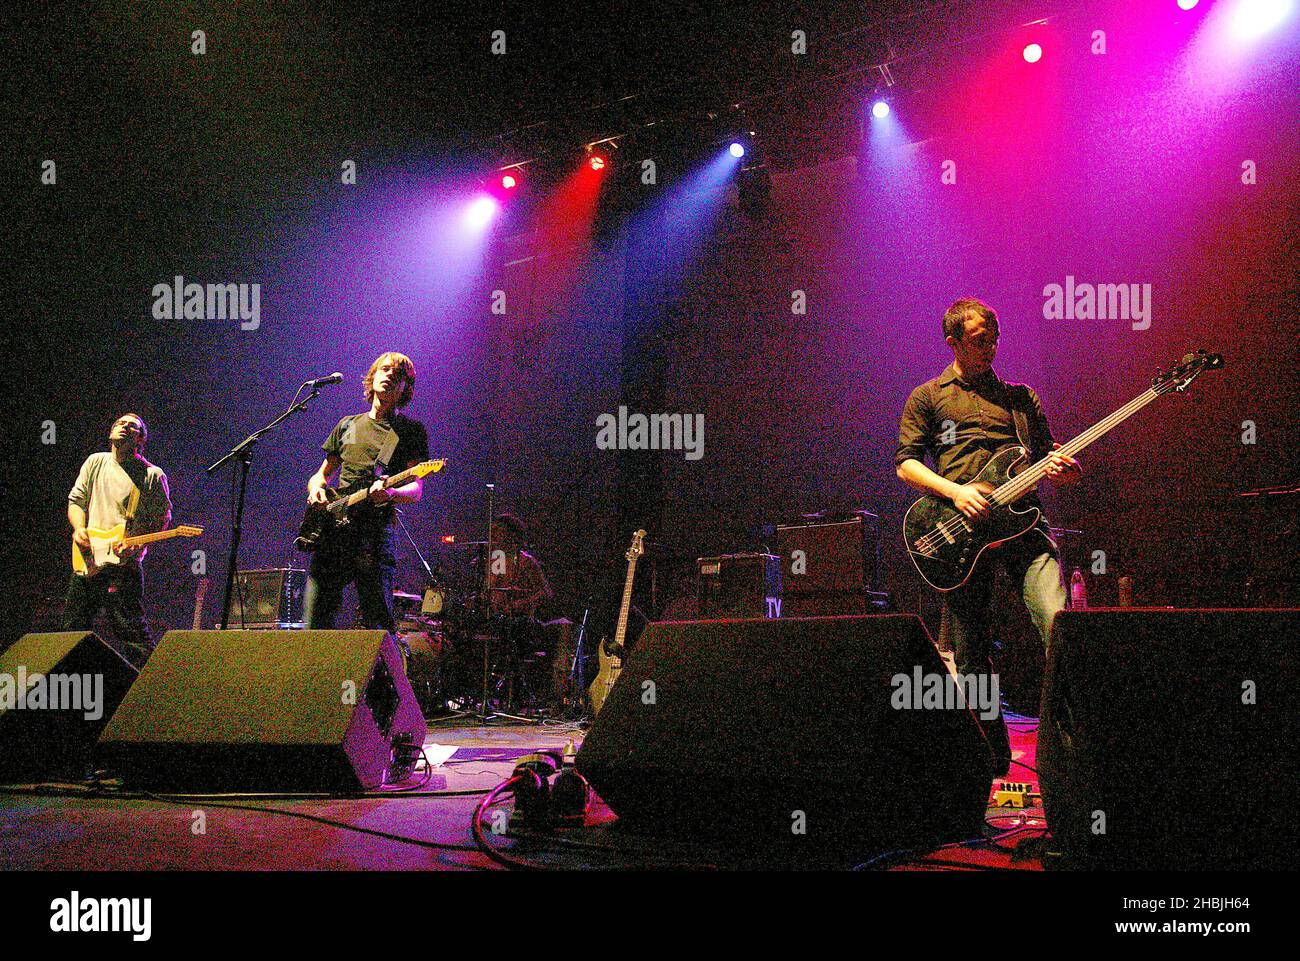 Tom Vek; perform and support The Bees at final date of UK tour promoting current album 'Free The Bee' at the Carling Academy Brixton in London. Tom Vek, Danny Nichols, Rich Harrison, James Price Stock Photo